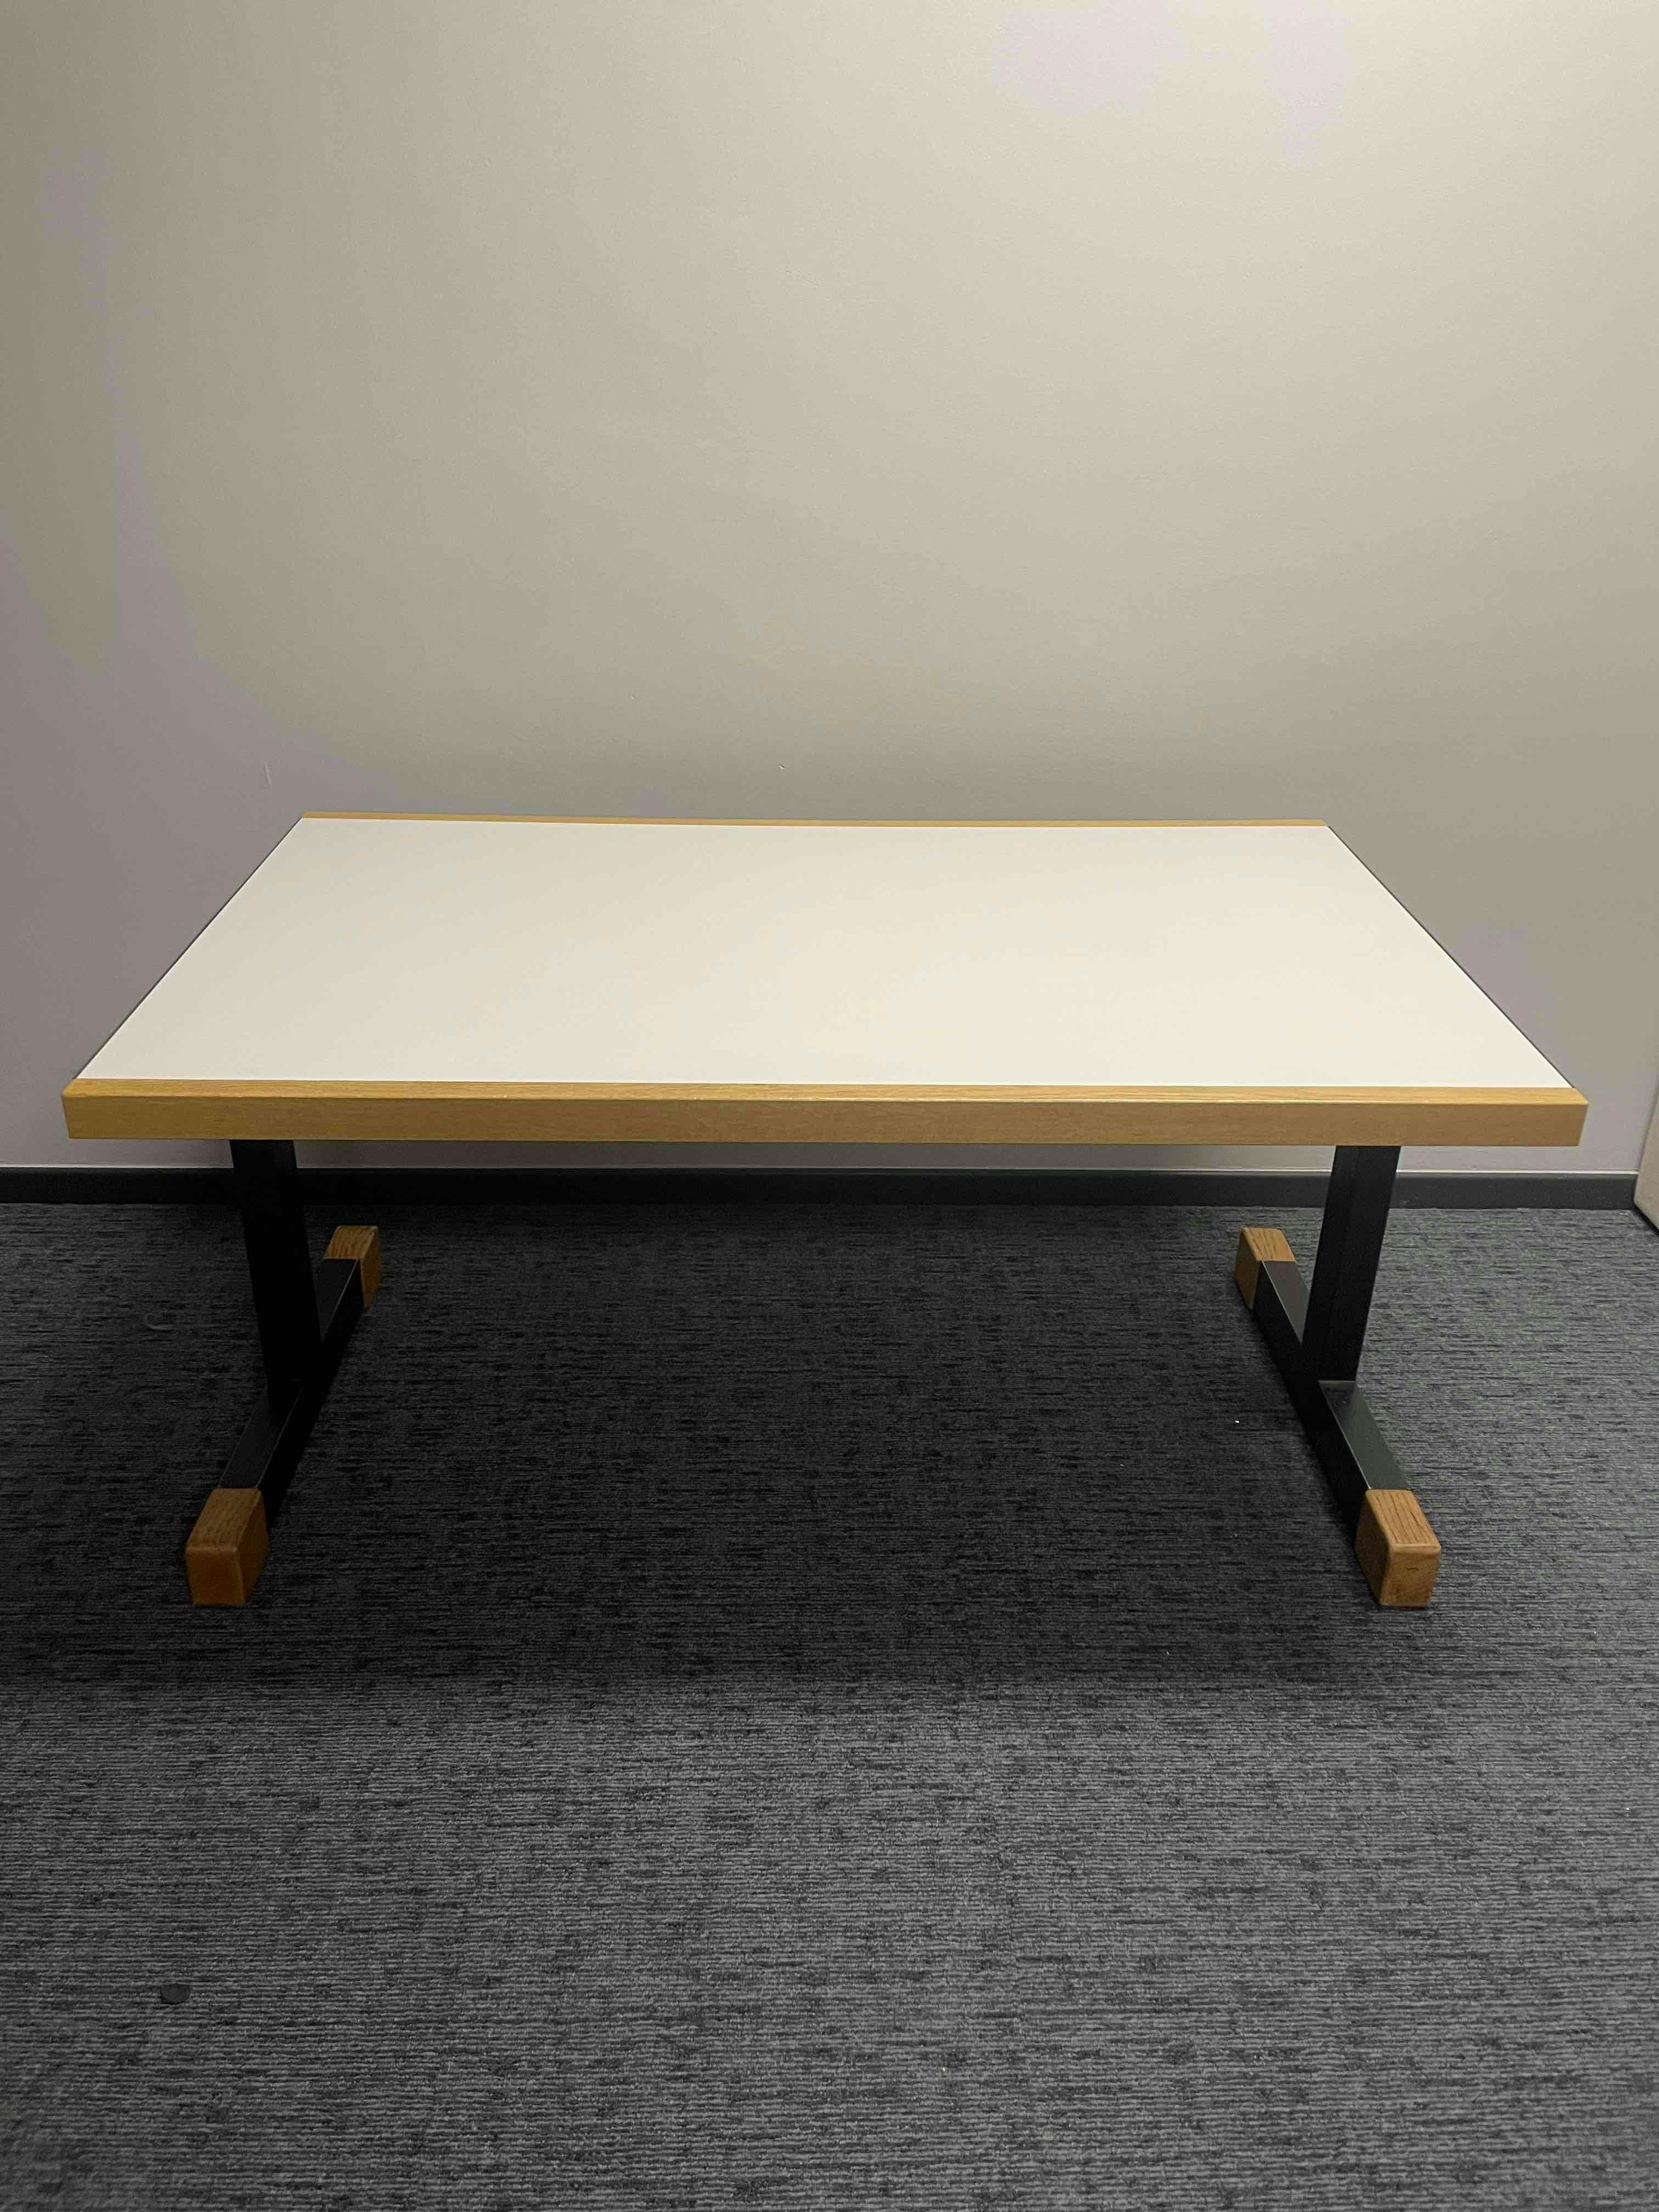 Wood table - Second hand quality "Tables" - Relieve Furniture